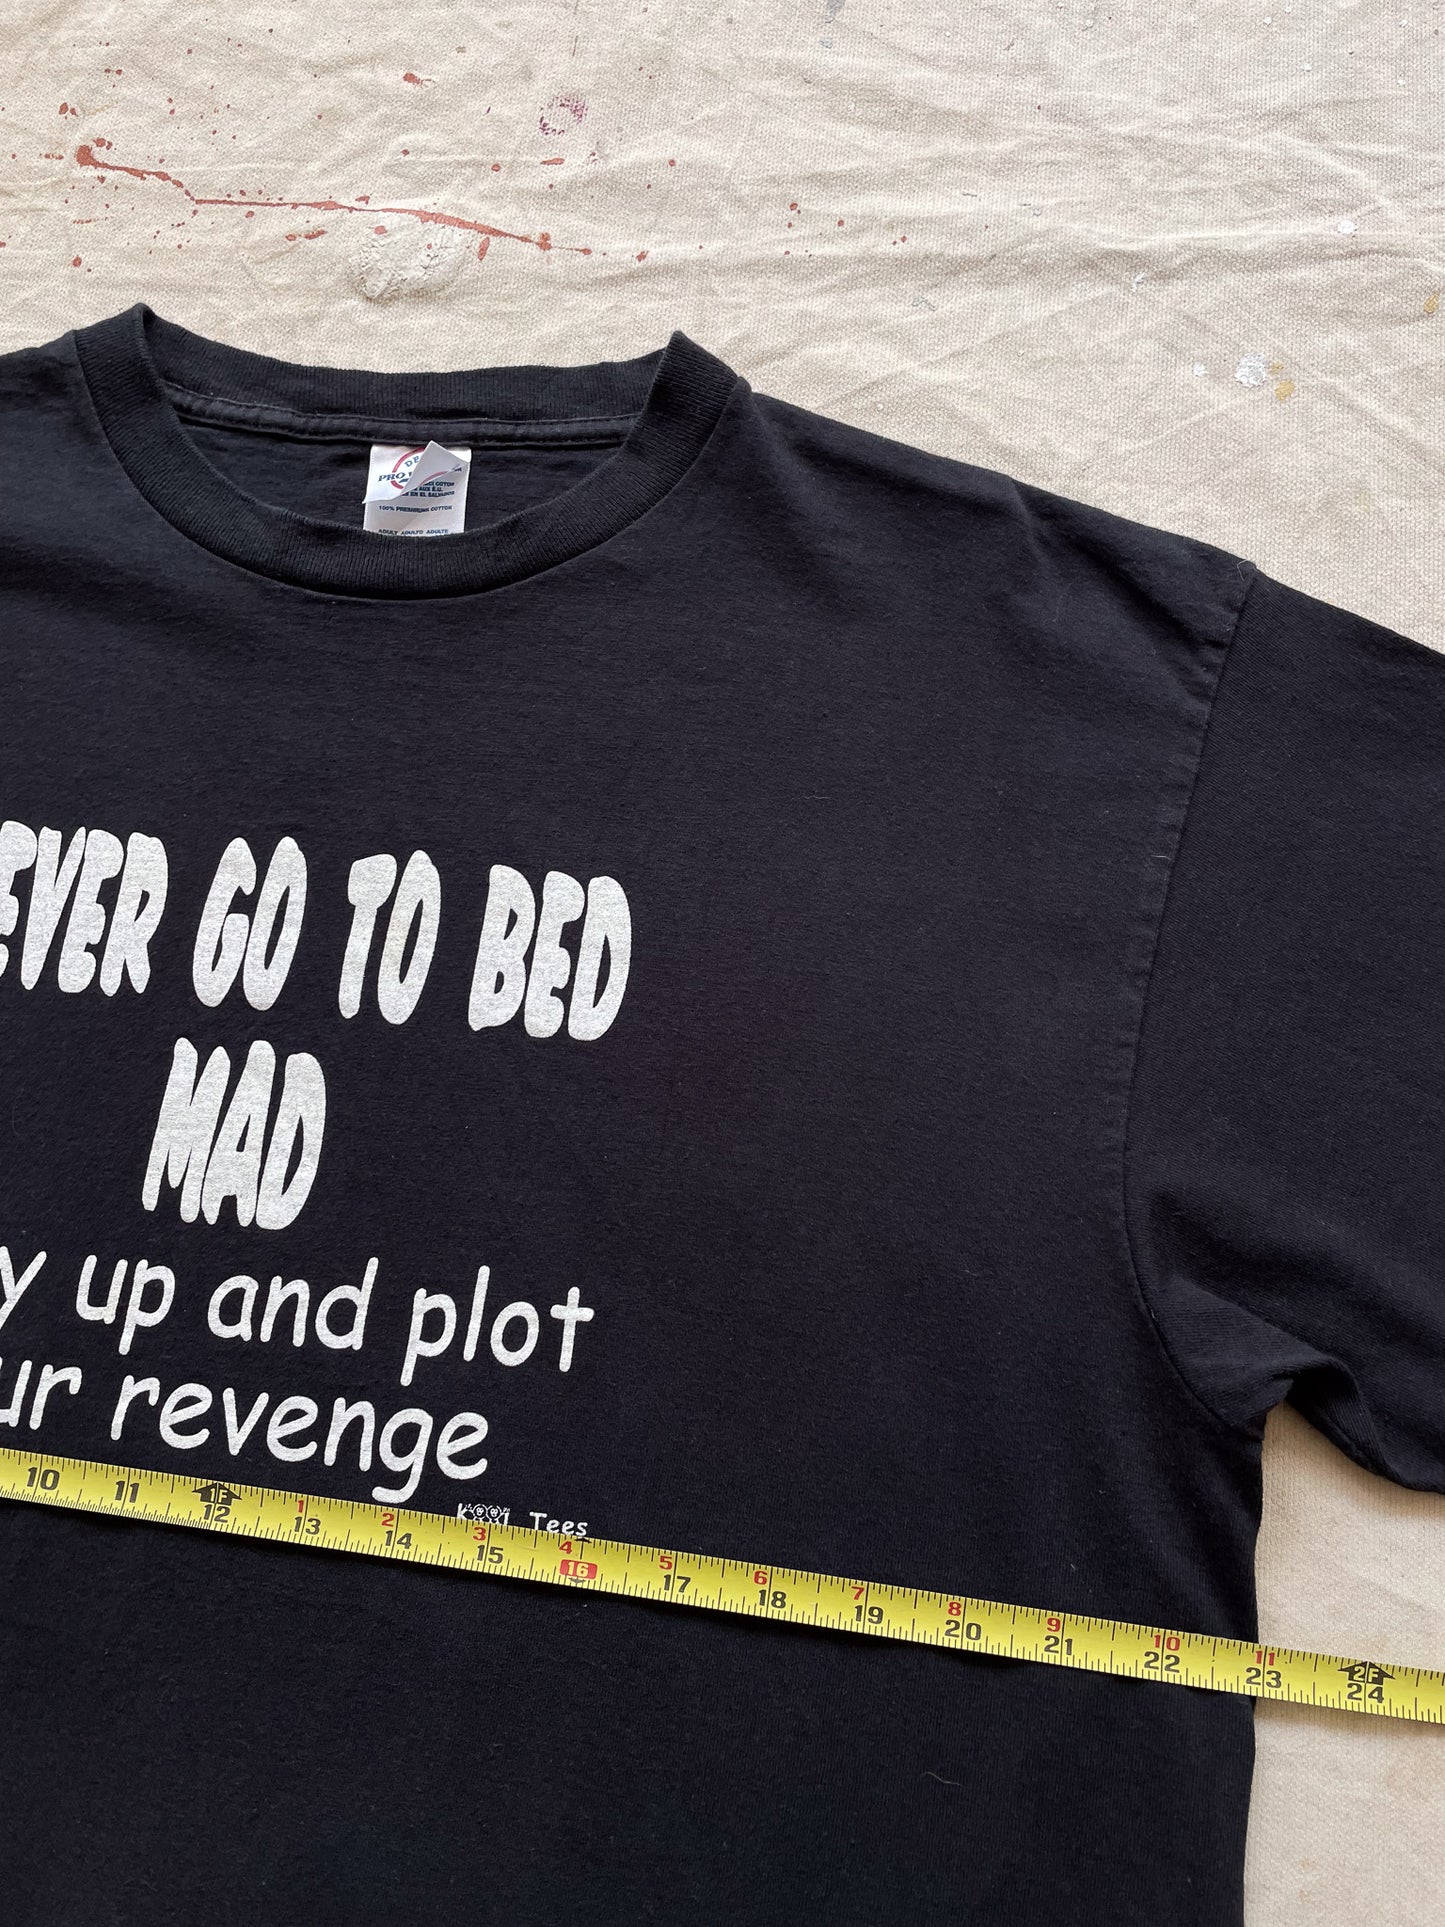 "Never Go To Bed Mad" T-Shirt—[XL]